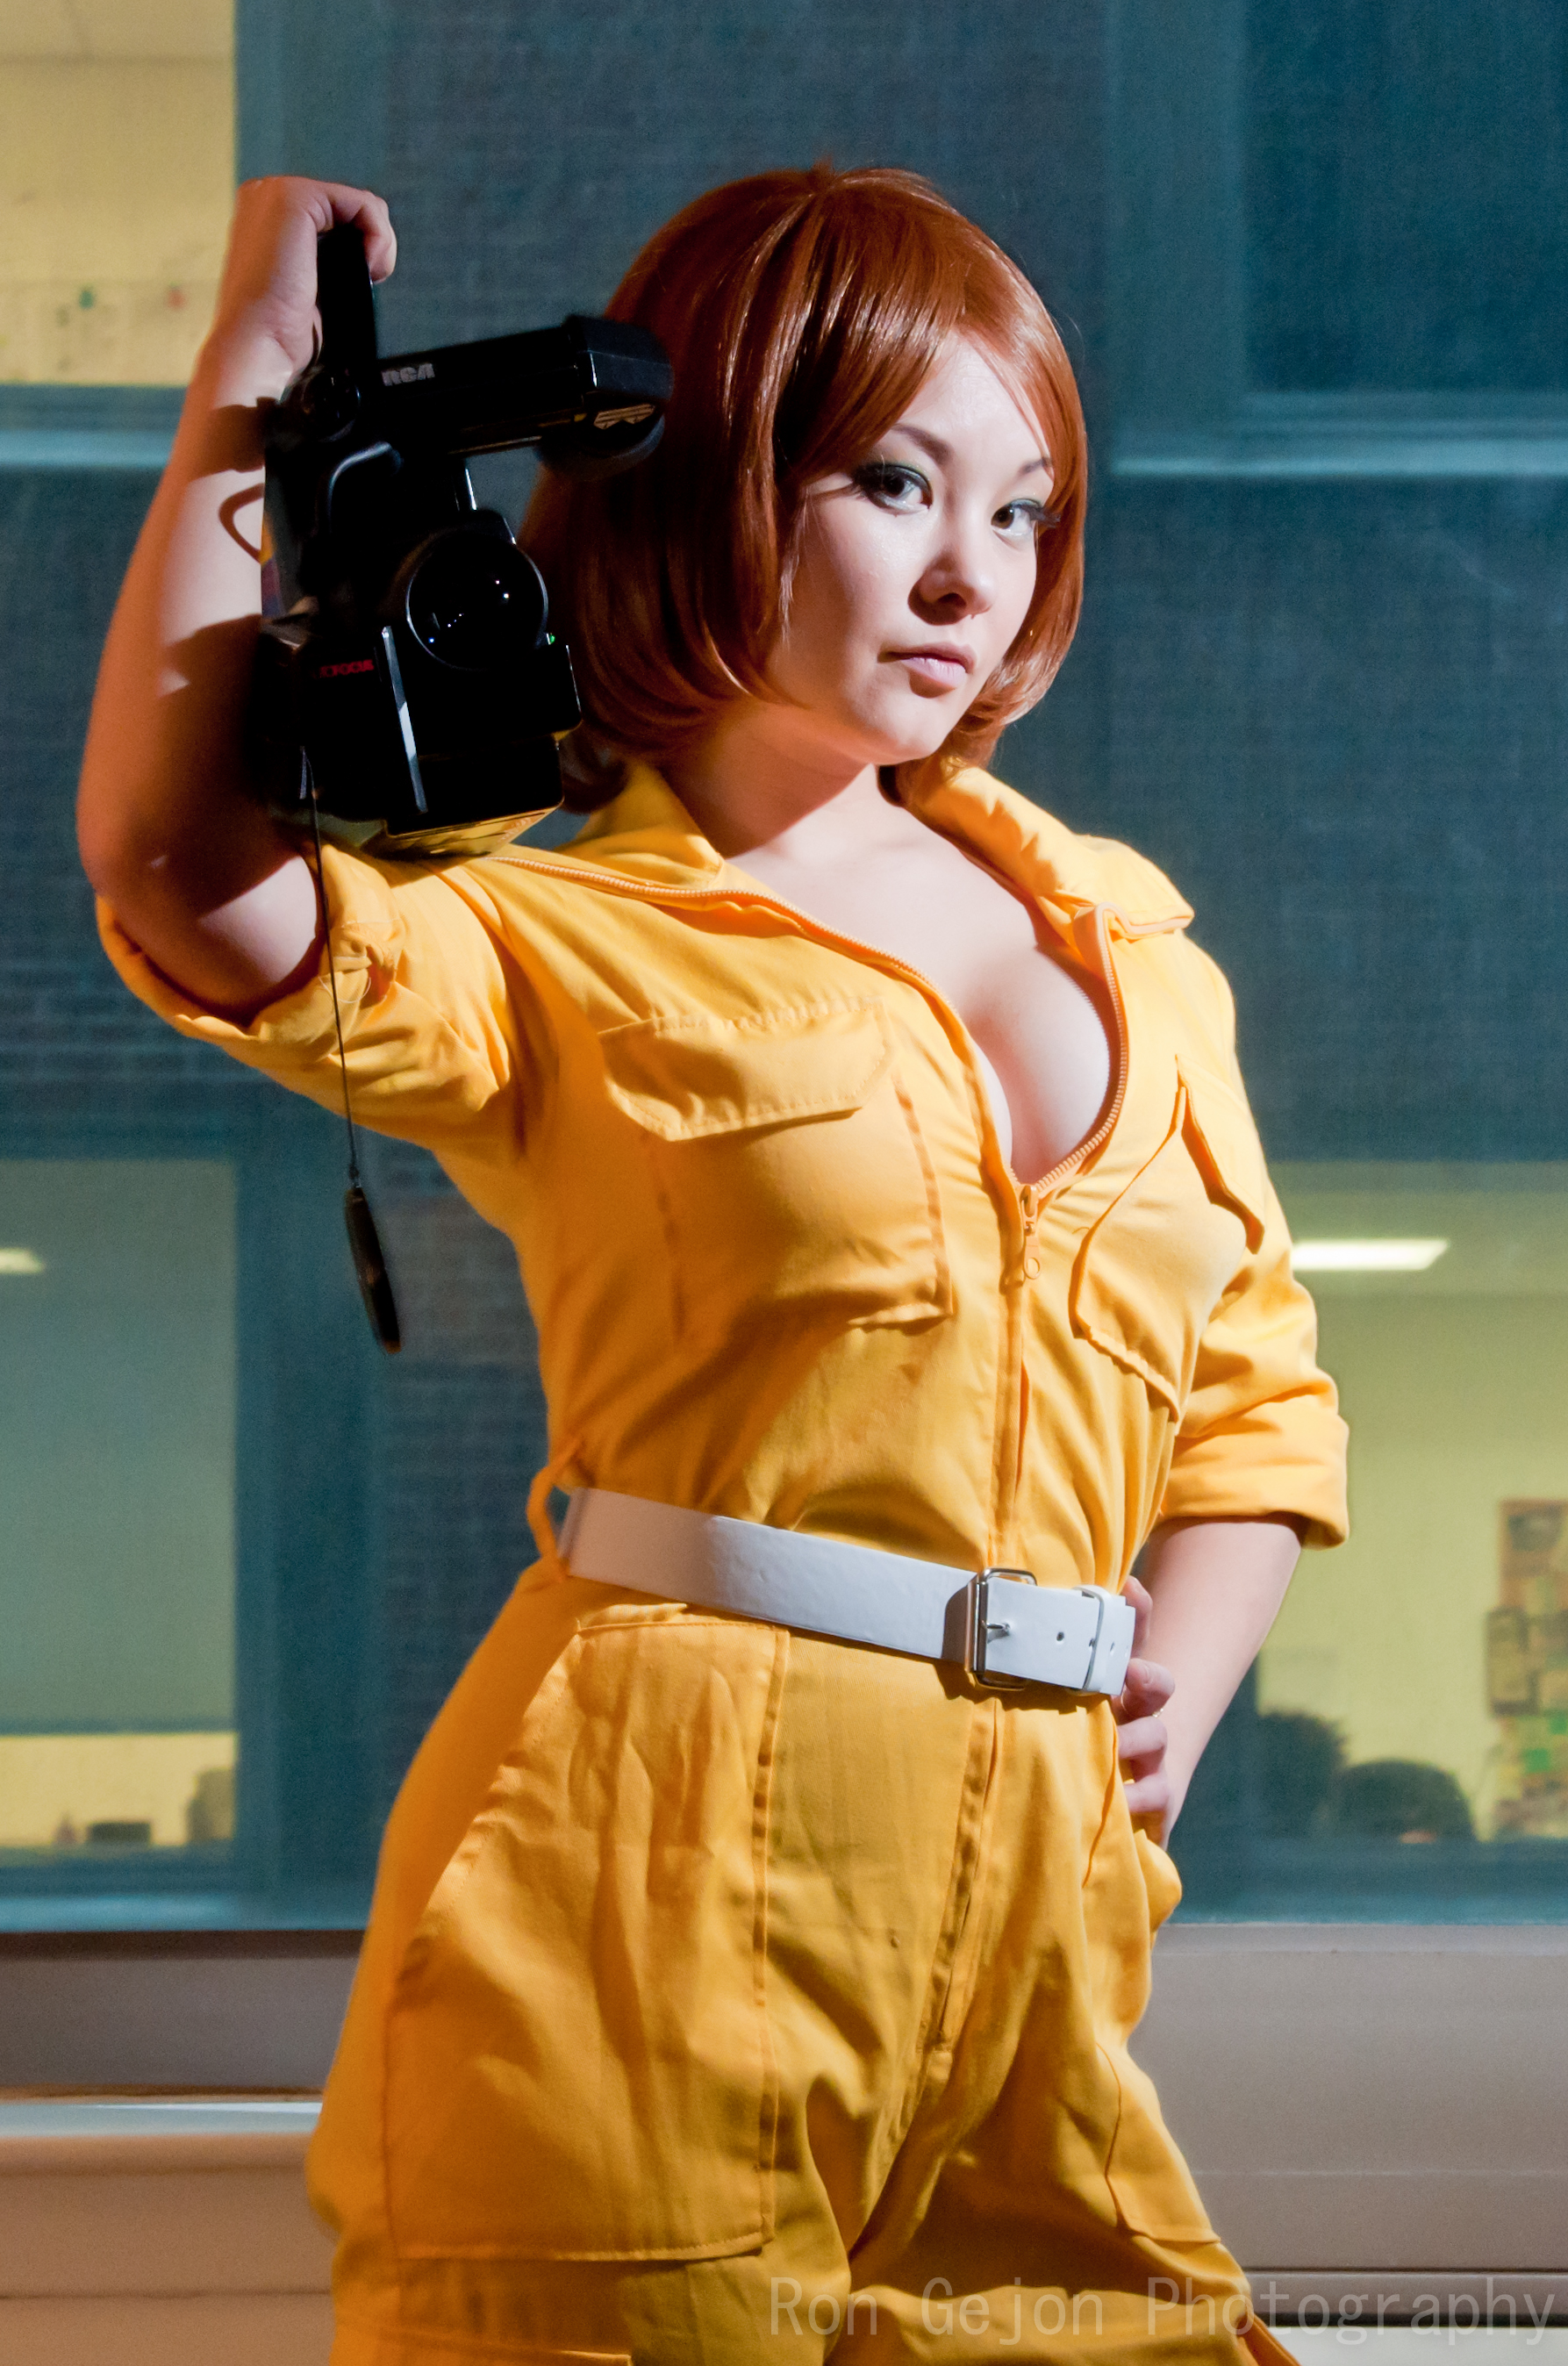 doug whitson recommends april oneil cosplay pic